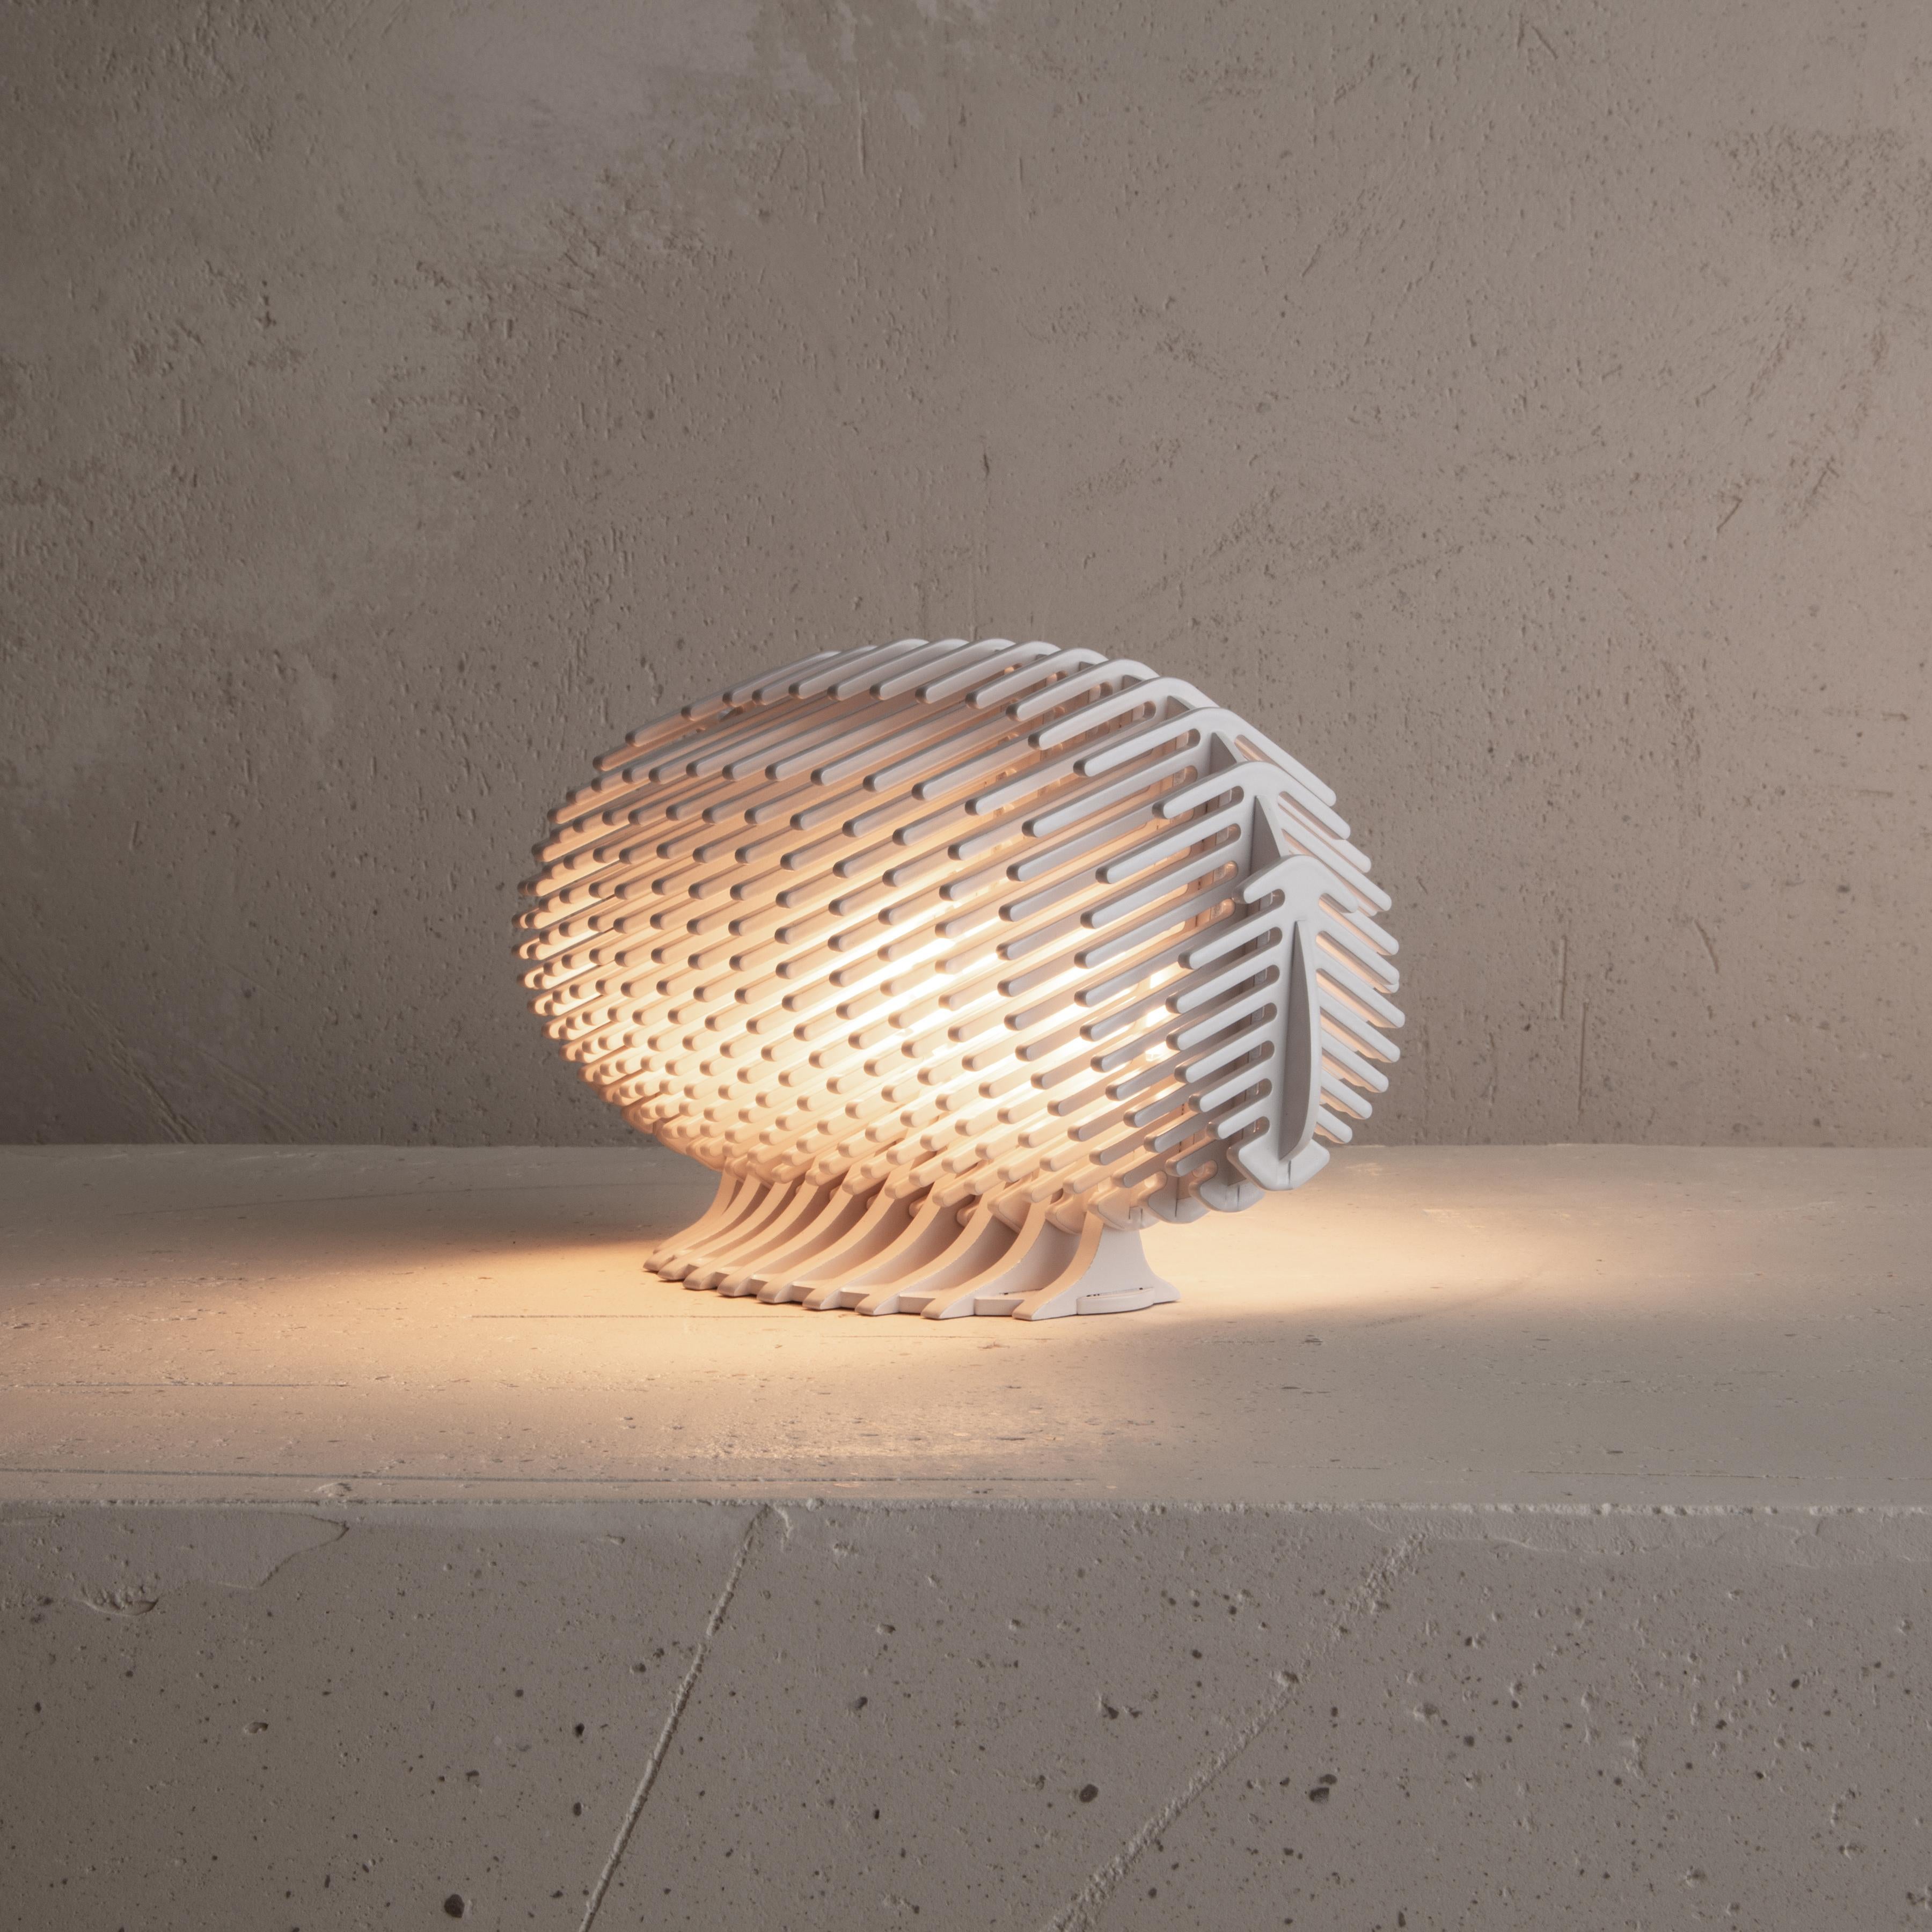 A small, sculptural light source, the lamp H - for hedgehog - may repose on its base whether on flat surface or on the wall.

Dreyfus’s latest “Objets de Lumière” (Objects of Light) expand on the artist’s significant body of work and his